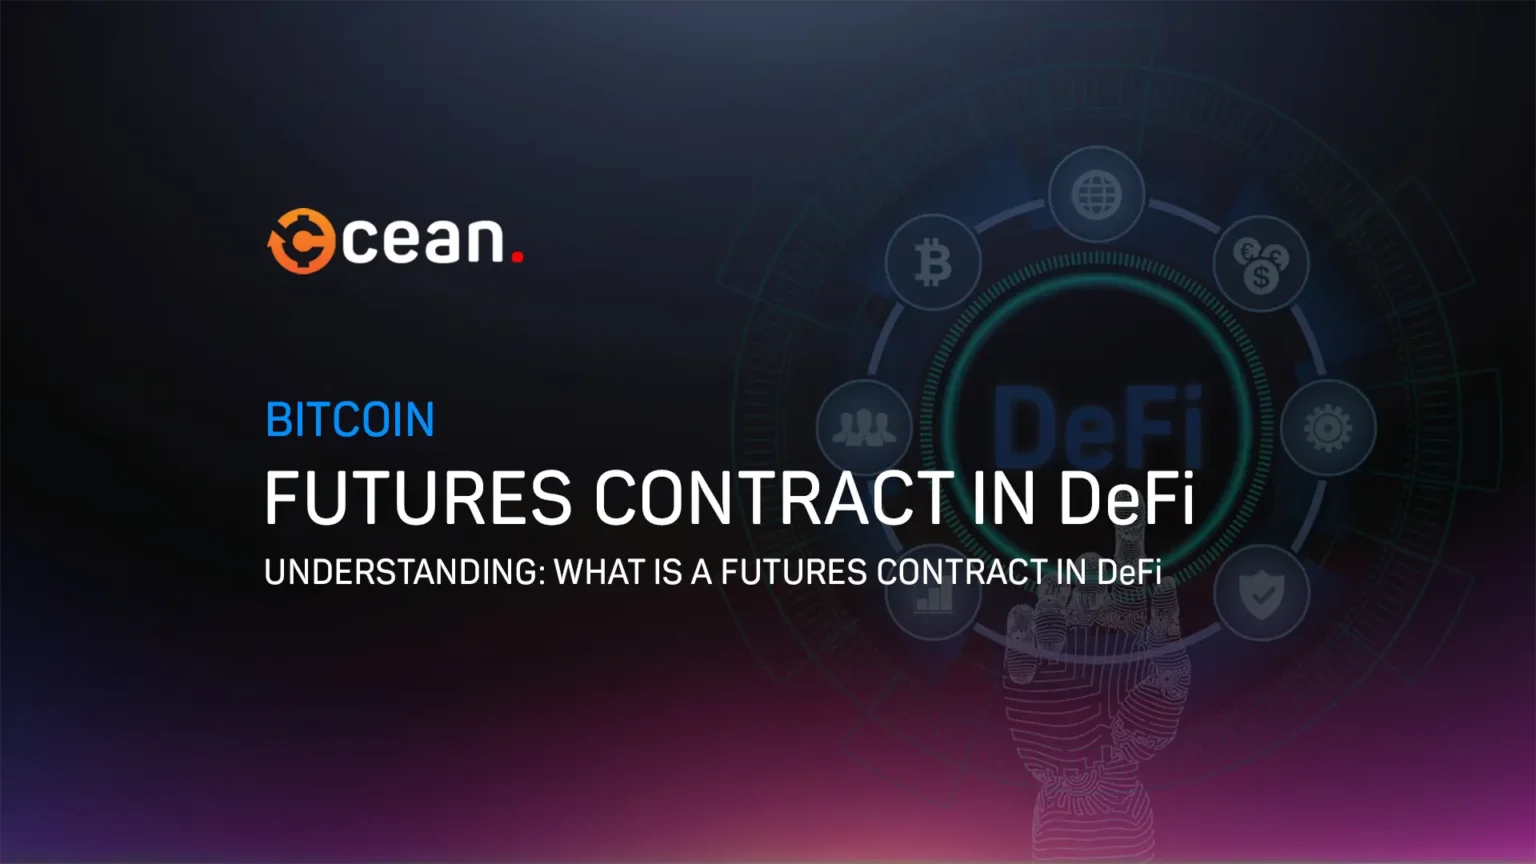 Futures Contract in DeFi